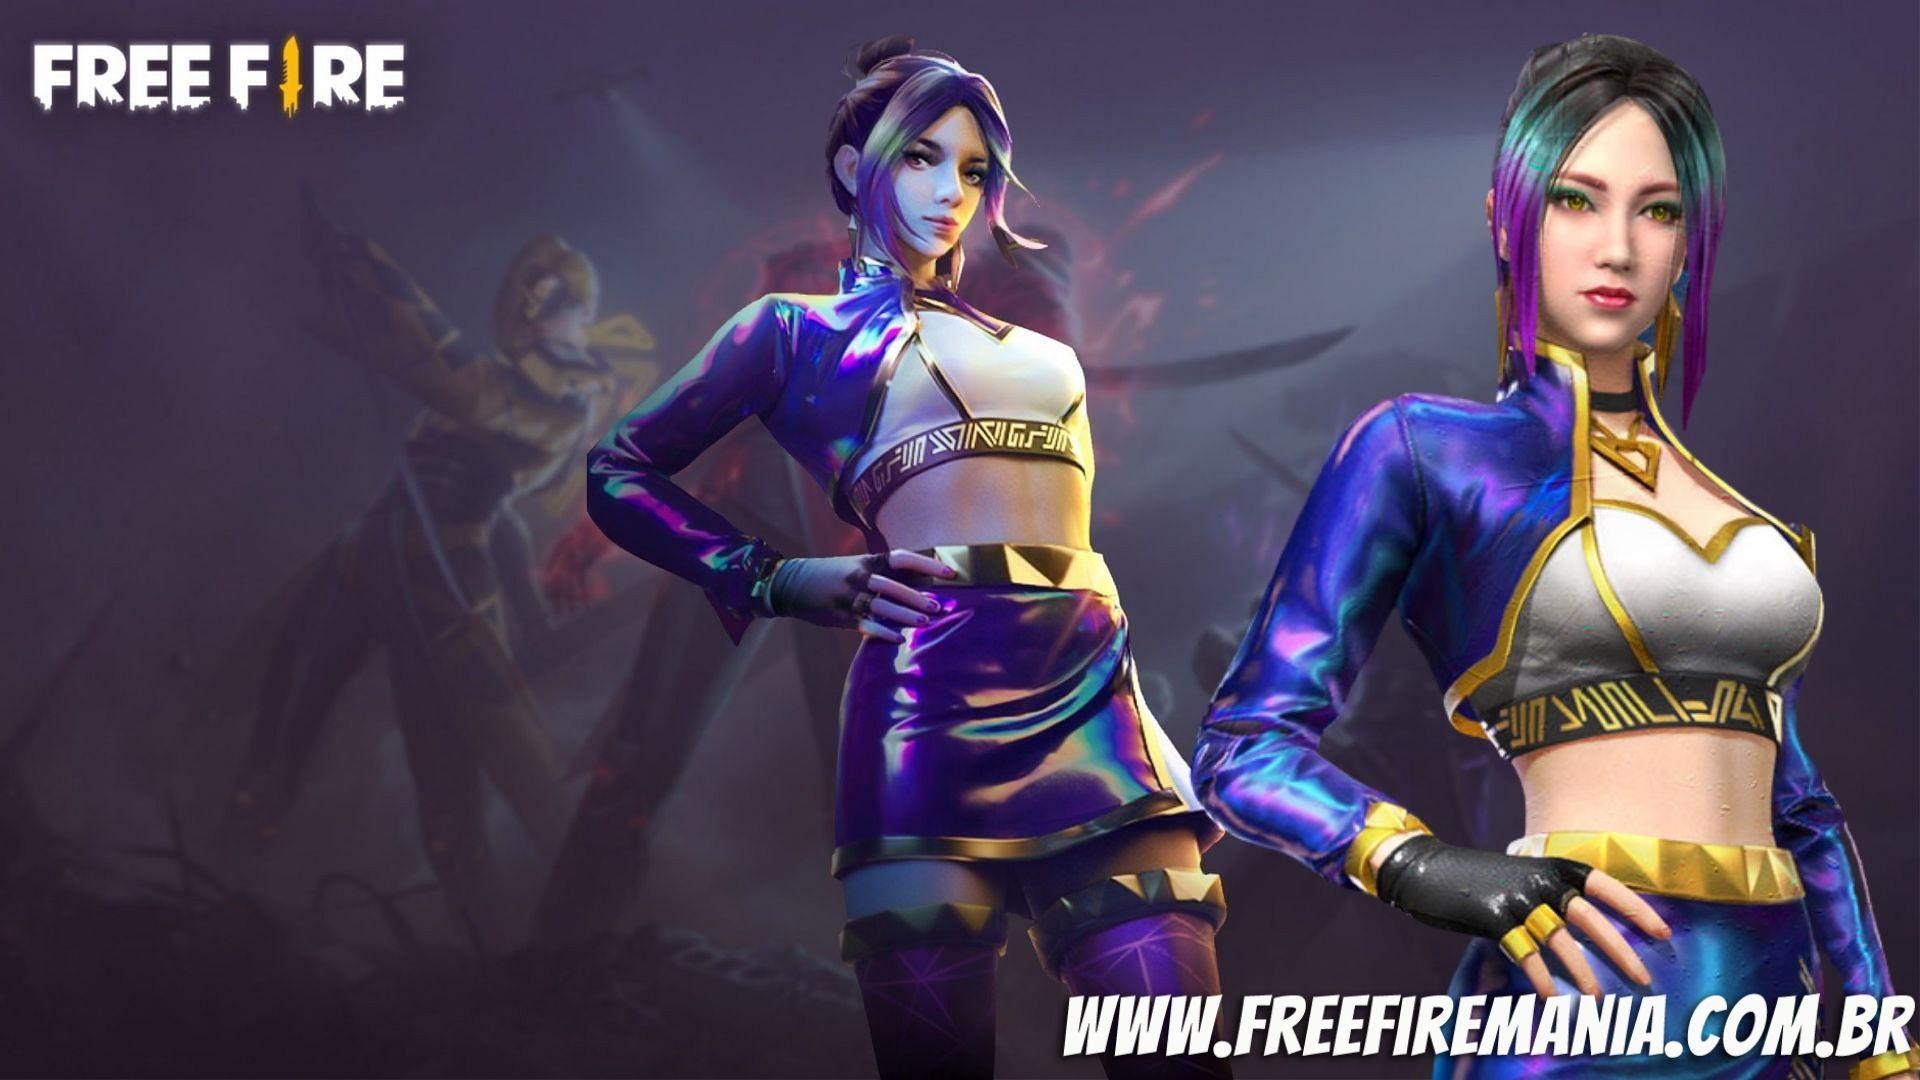 Free Fire Launches The New Squad BEATz Game Mode Today